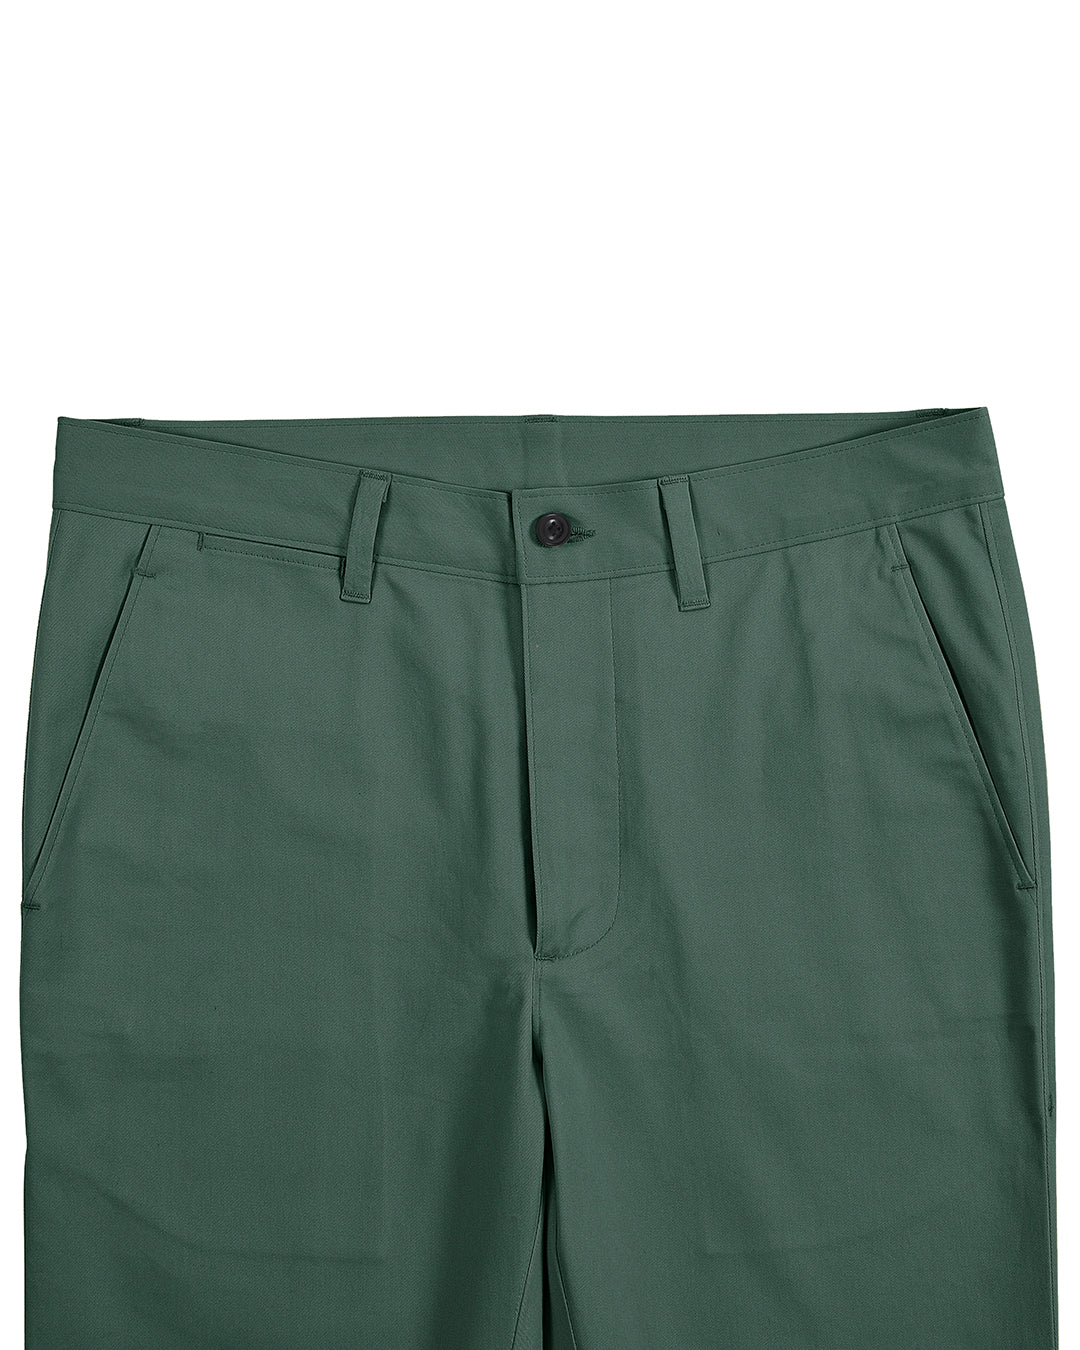 Front view of custom Genoa Chino pants for men by Luxire in fern green